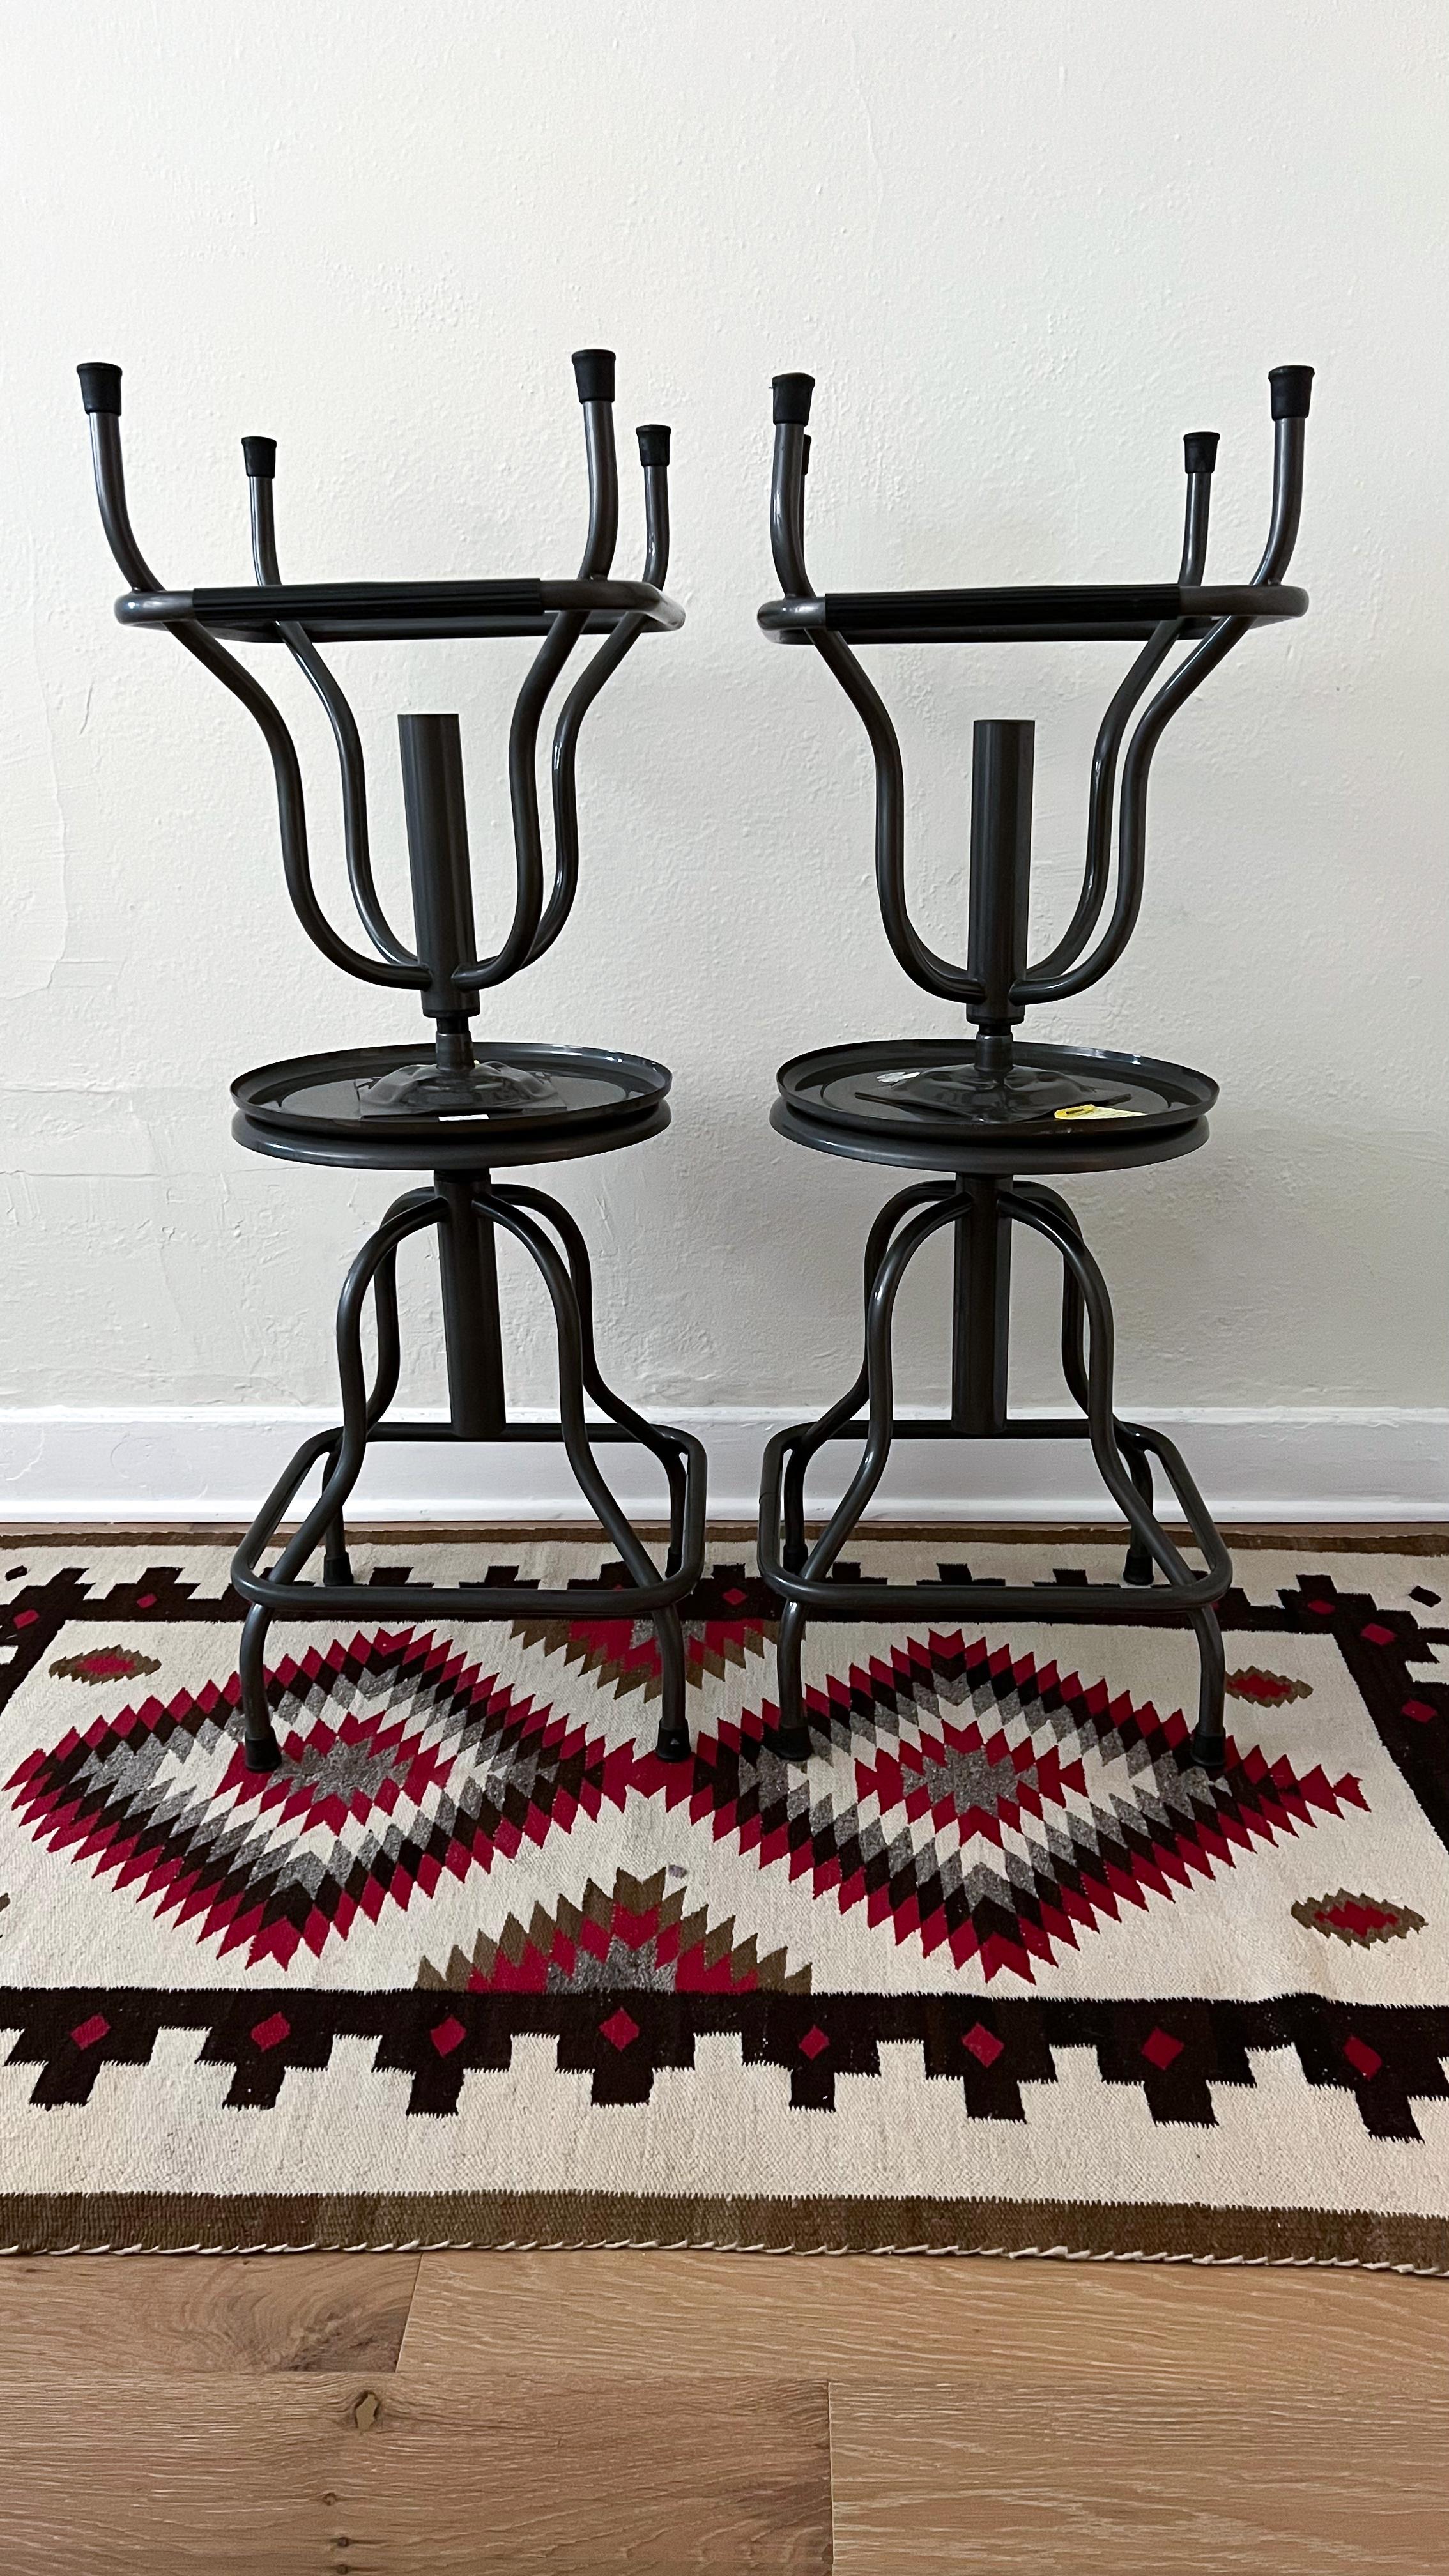 1960s Vintage Safco Diesel Stool In Excellent Condition For Sale In Los Angeles, CA